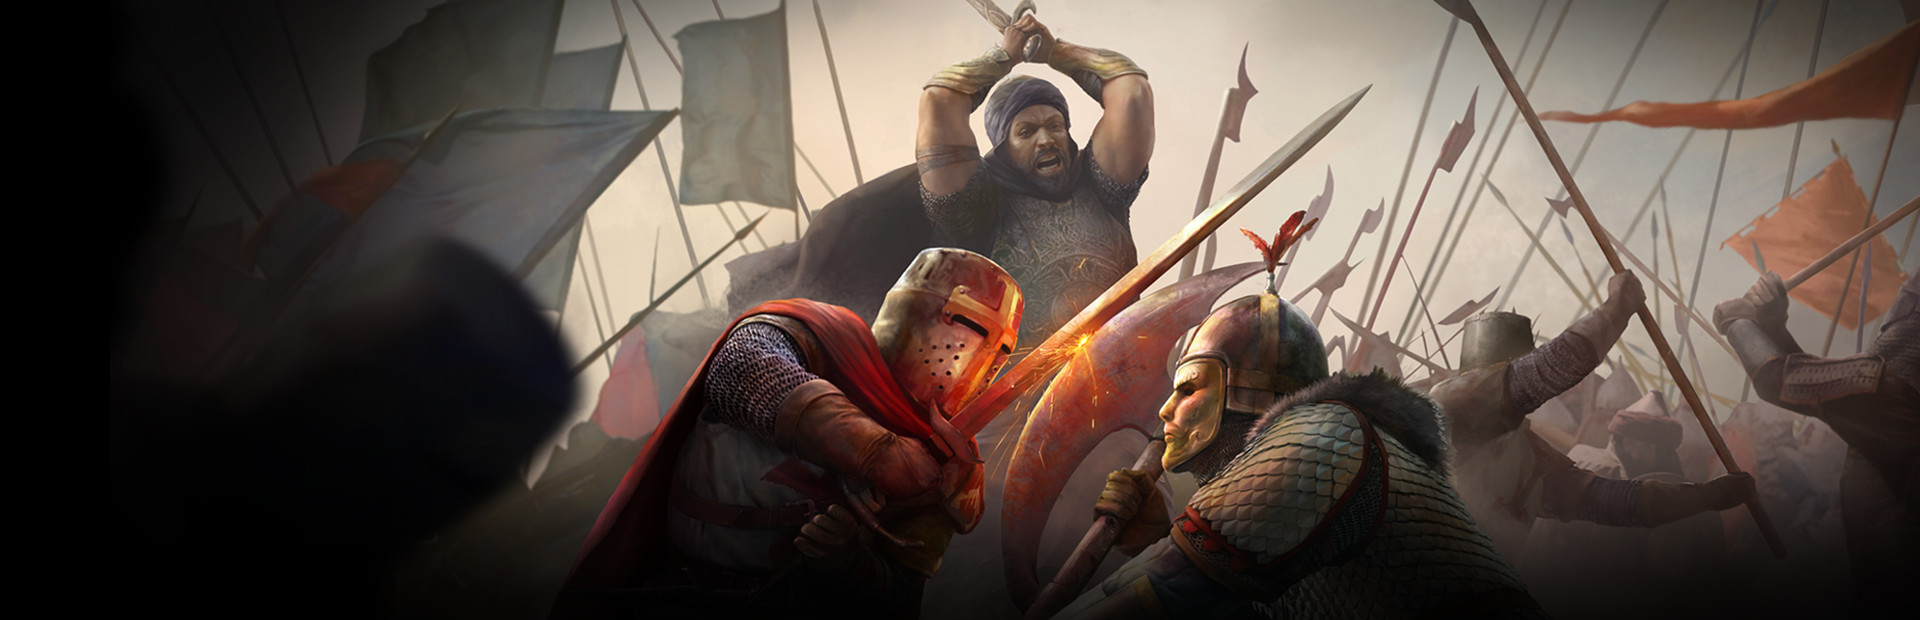 March of Empires cover image